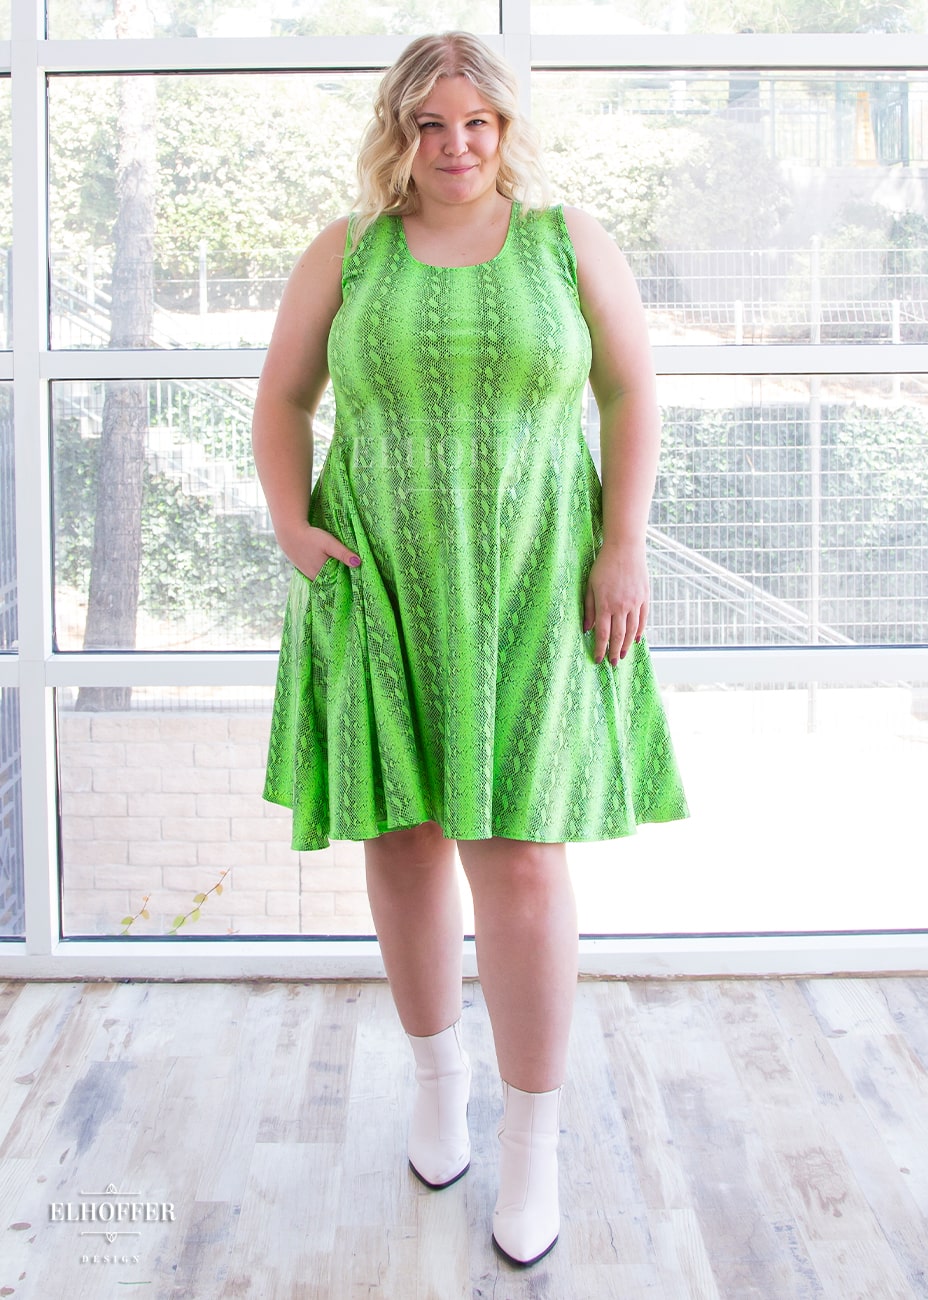 Sarah, a fair skinned size XL model with long blonde hair, wears a sleeveless knee length dress that is fitted in the torso and full in the skirt. The print is croki green, a lime green snake print. She has her hand in a generous pocket.